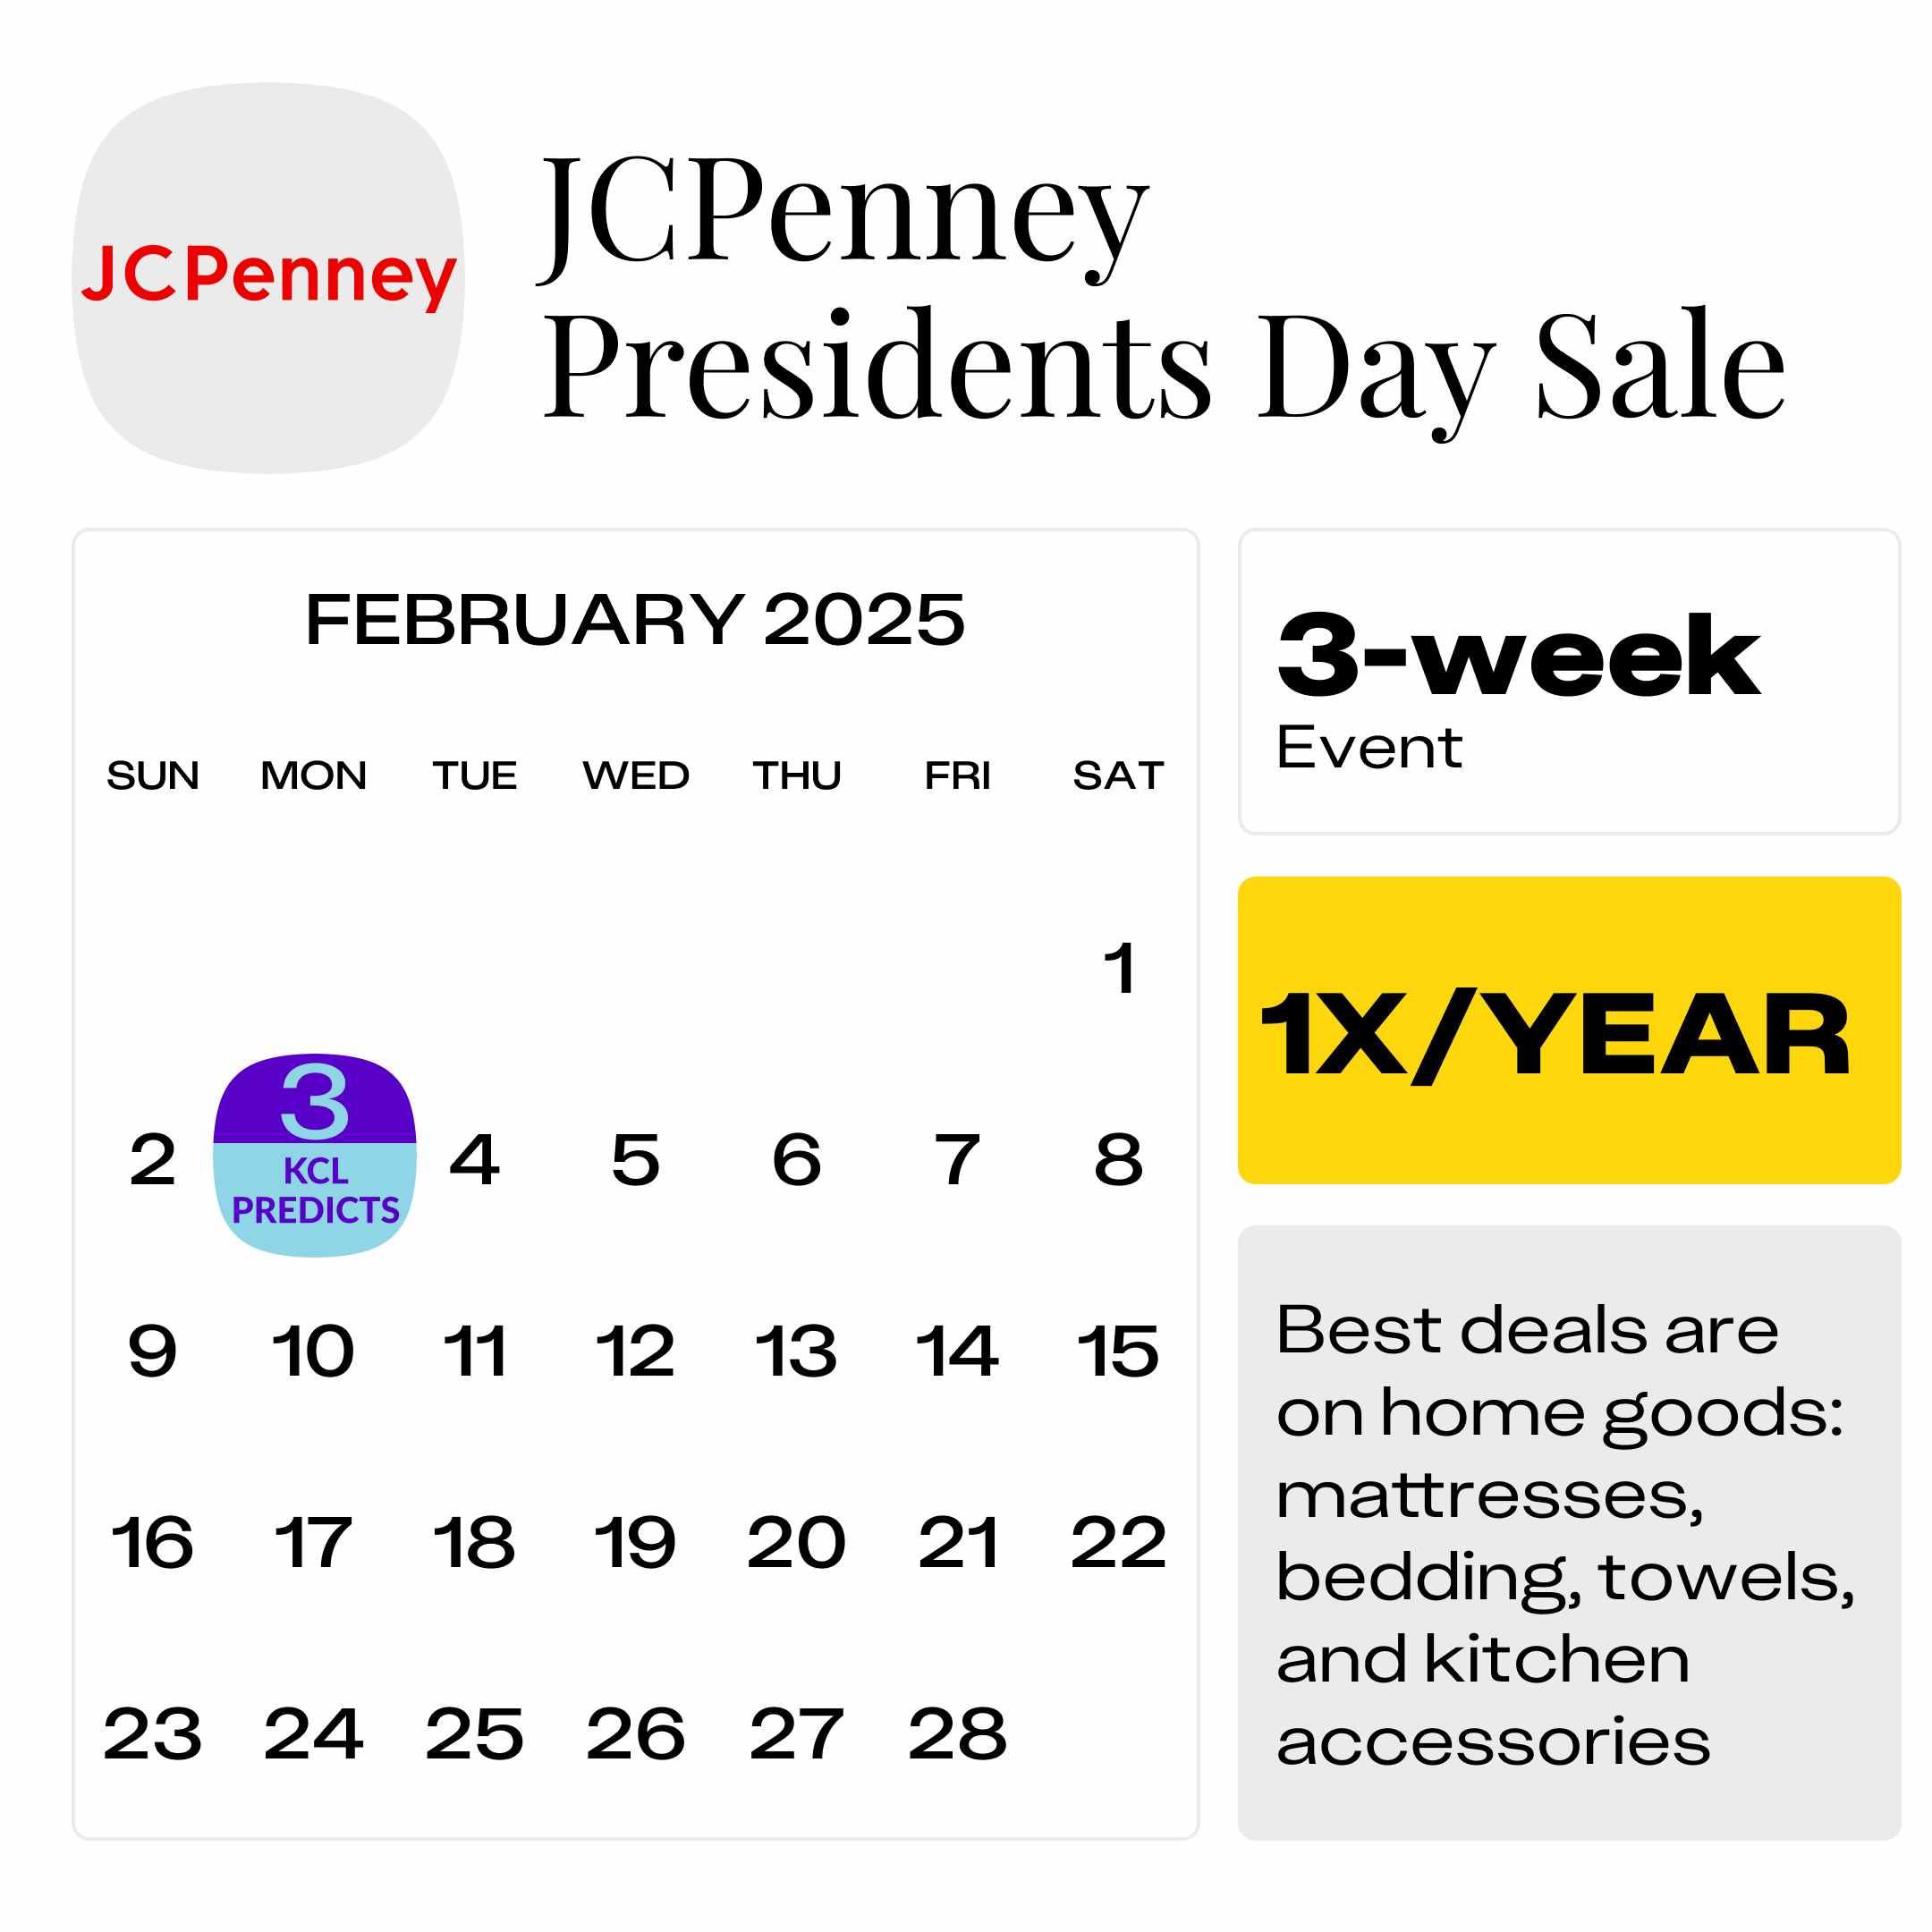 JCPenney-Presidents-Day-Sale